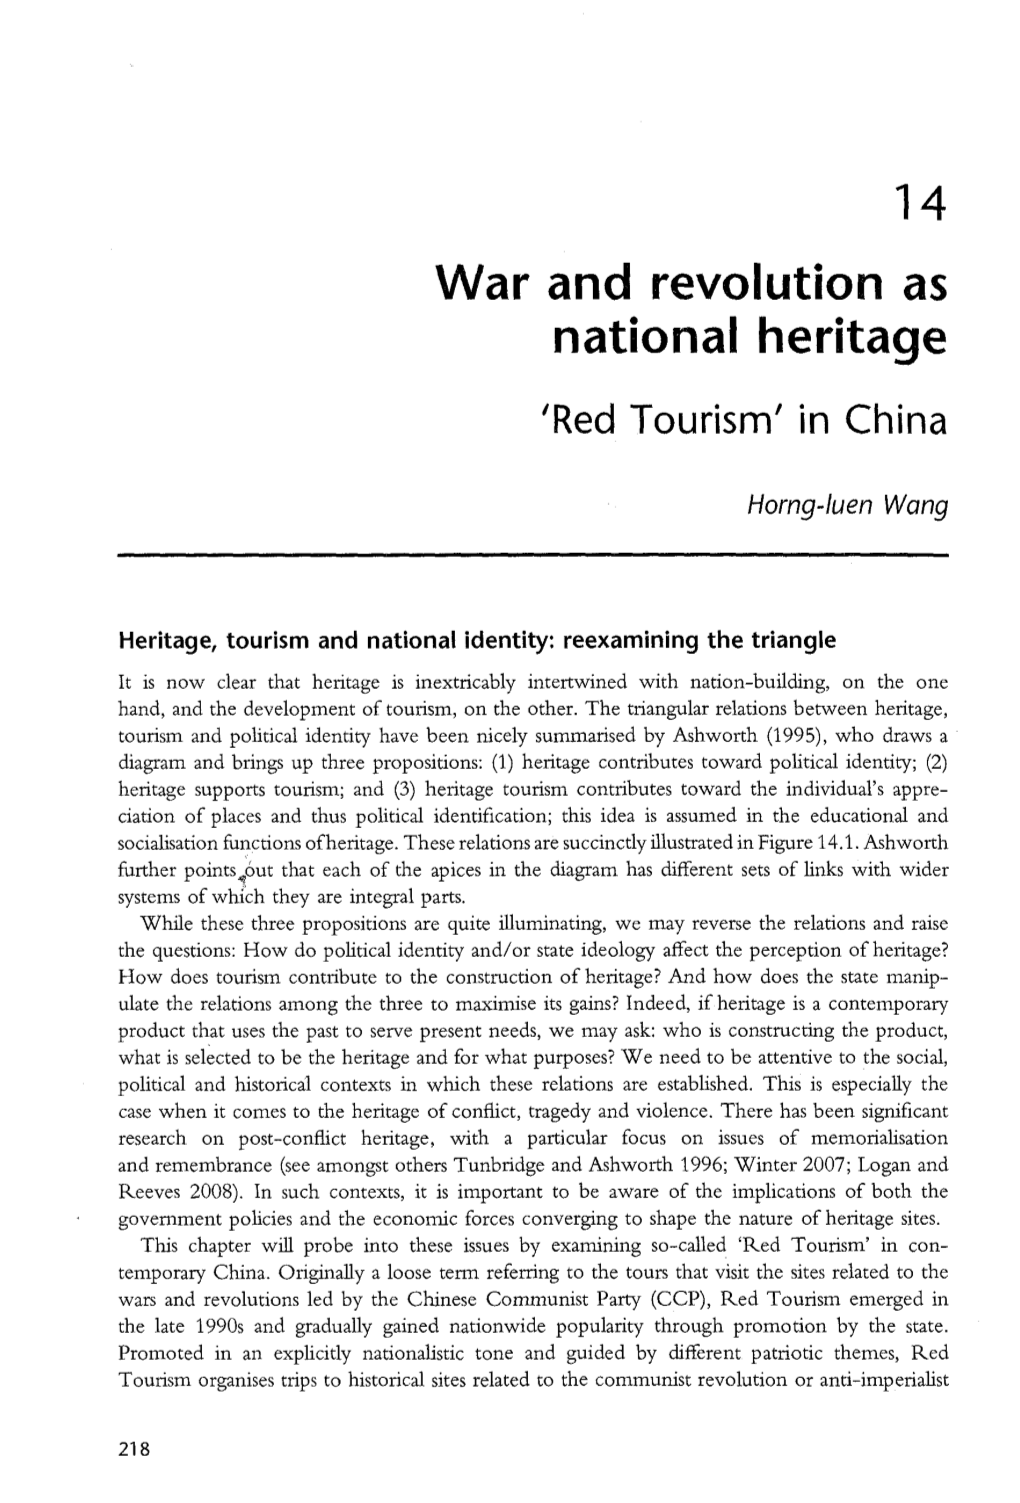 War and Revolution As National Heritage